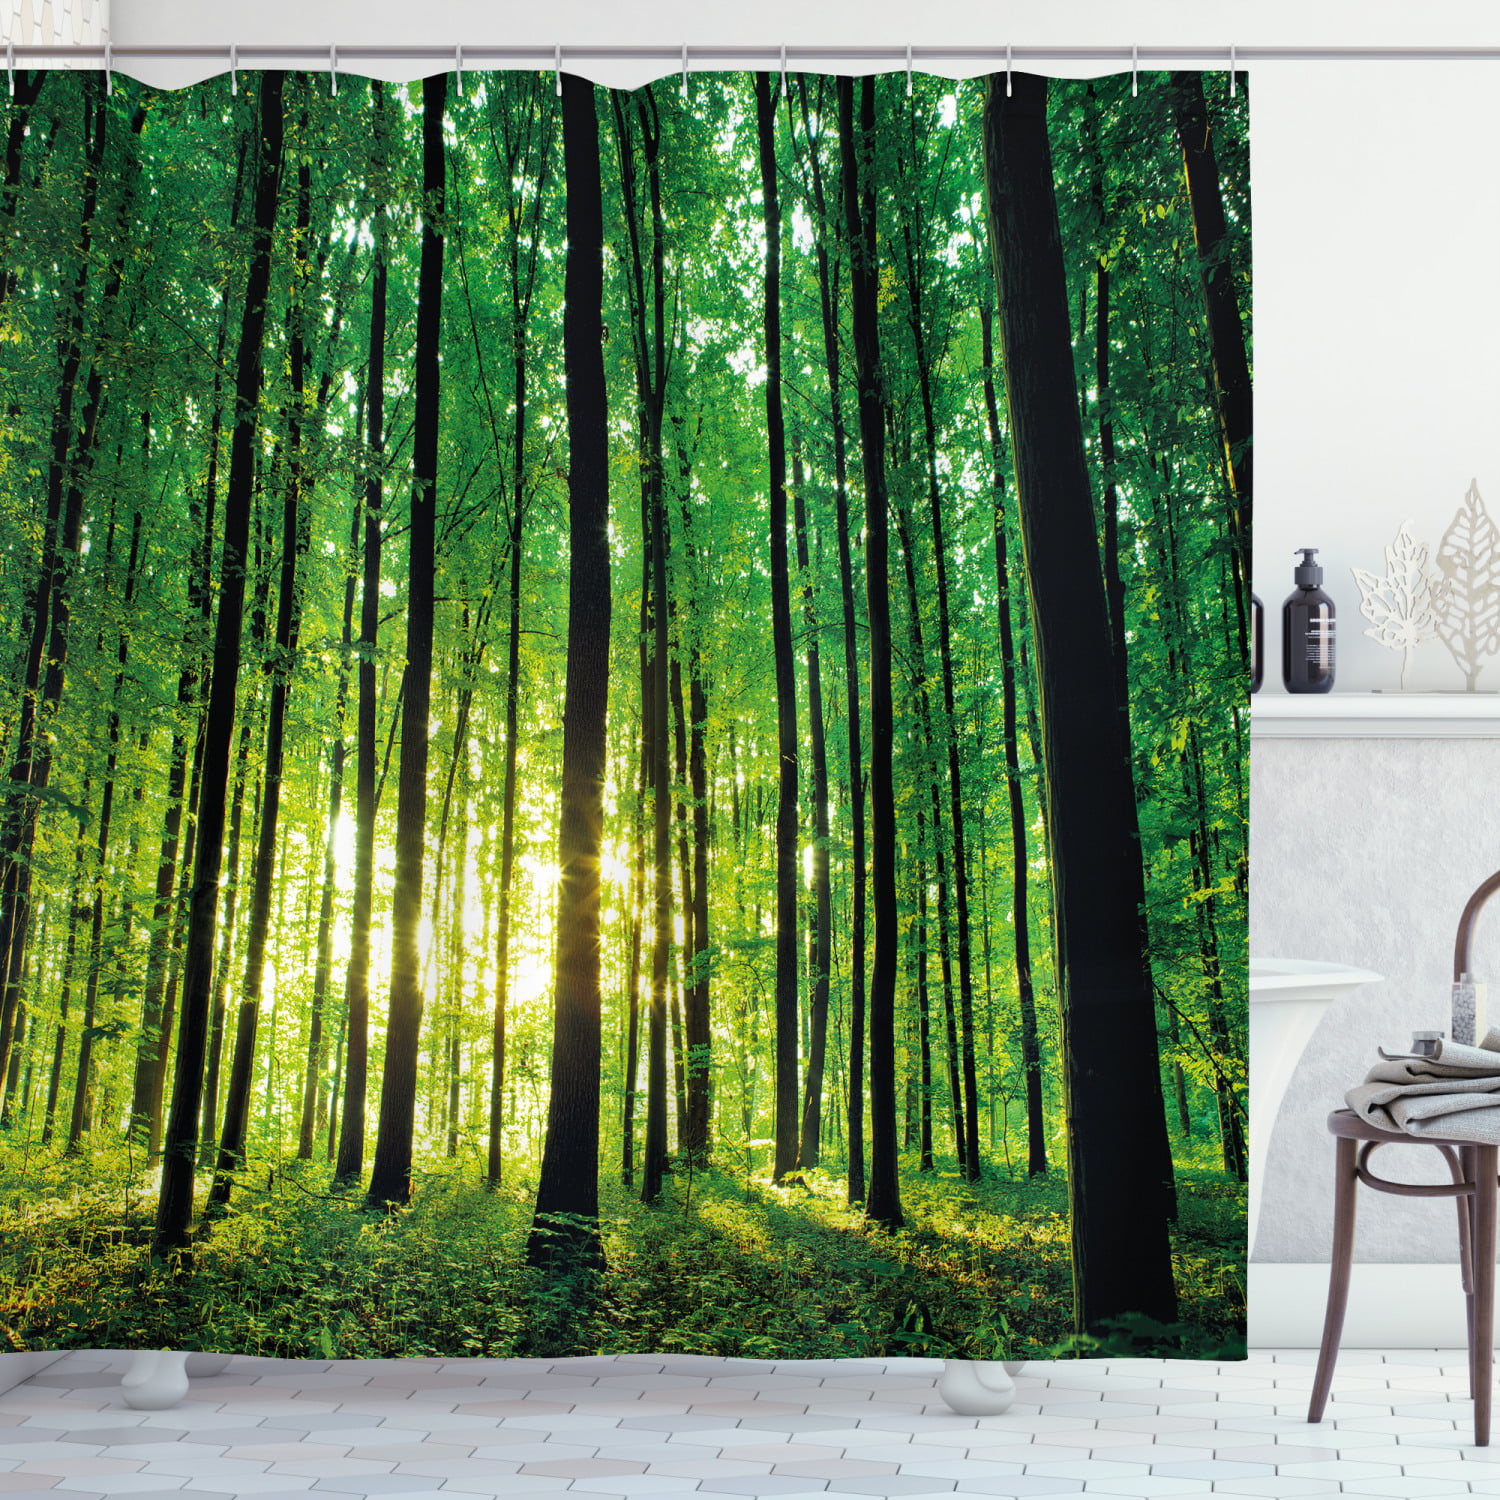 Green Fantasy Forest Stone Path Shower Curtain Set Bathroom Mat Polyester Fabric 